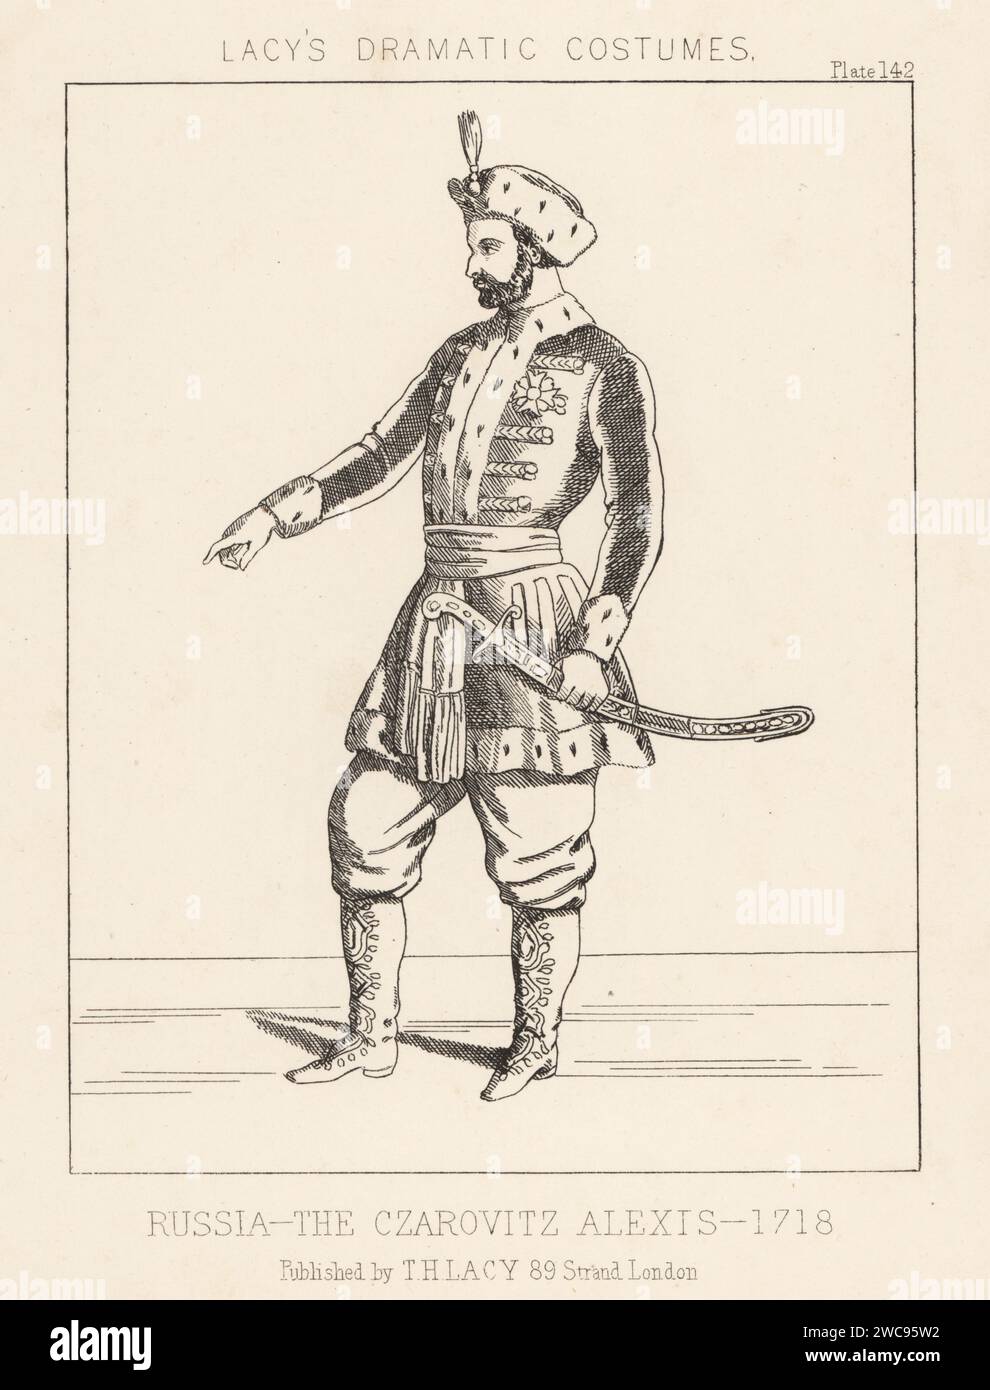 Grand Duke Alexei Petrovich of Russia, Russian Tsarevich, son of Peter the Great, 1690-1718. In ermine-lined cap, ermine-lined coat, breeches and boots, with sabre. The Czarovitz Alexis, Russia, 1718. Lithograph from Thomas Hailes Lacy's Male Costumes, Historical, National and Dramatic in 200 Plates, London, 1865. Lacy (1809-1873) was a British actor, playwright, theatrical manager and publisher. Stock Photo